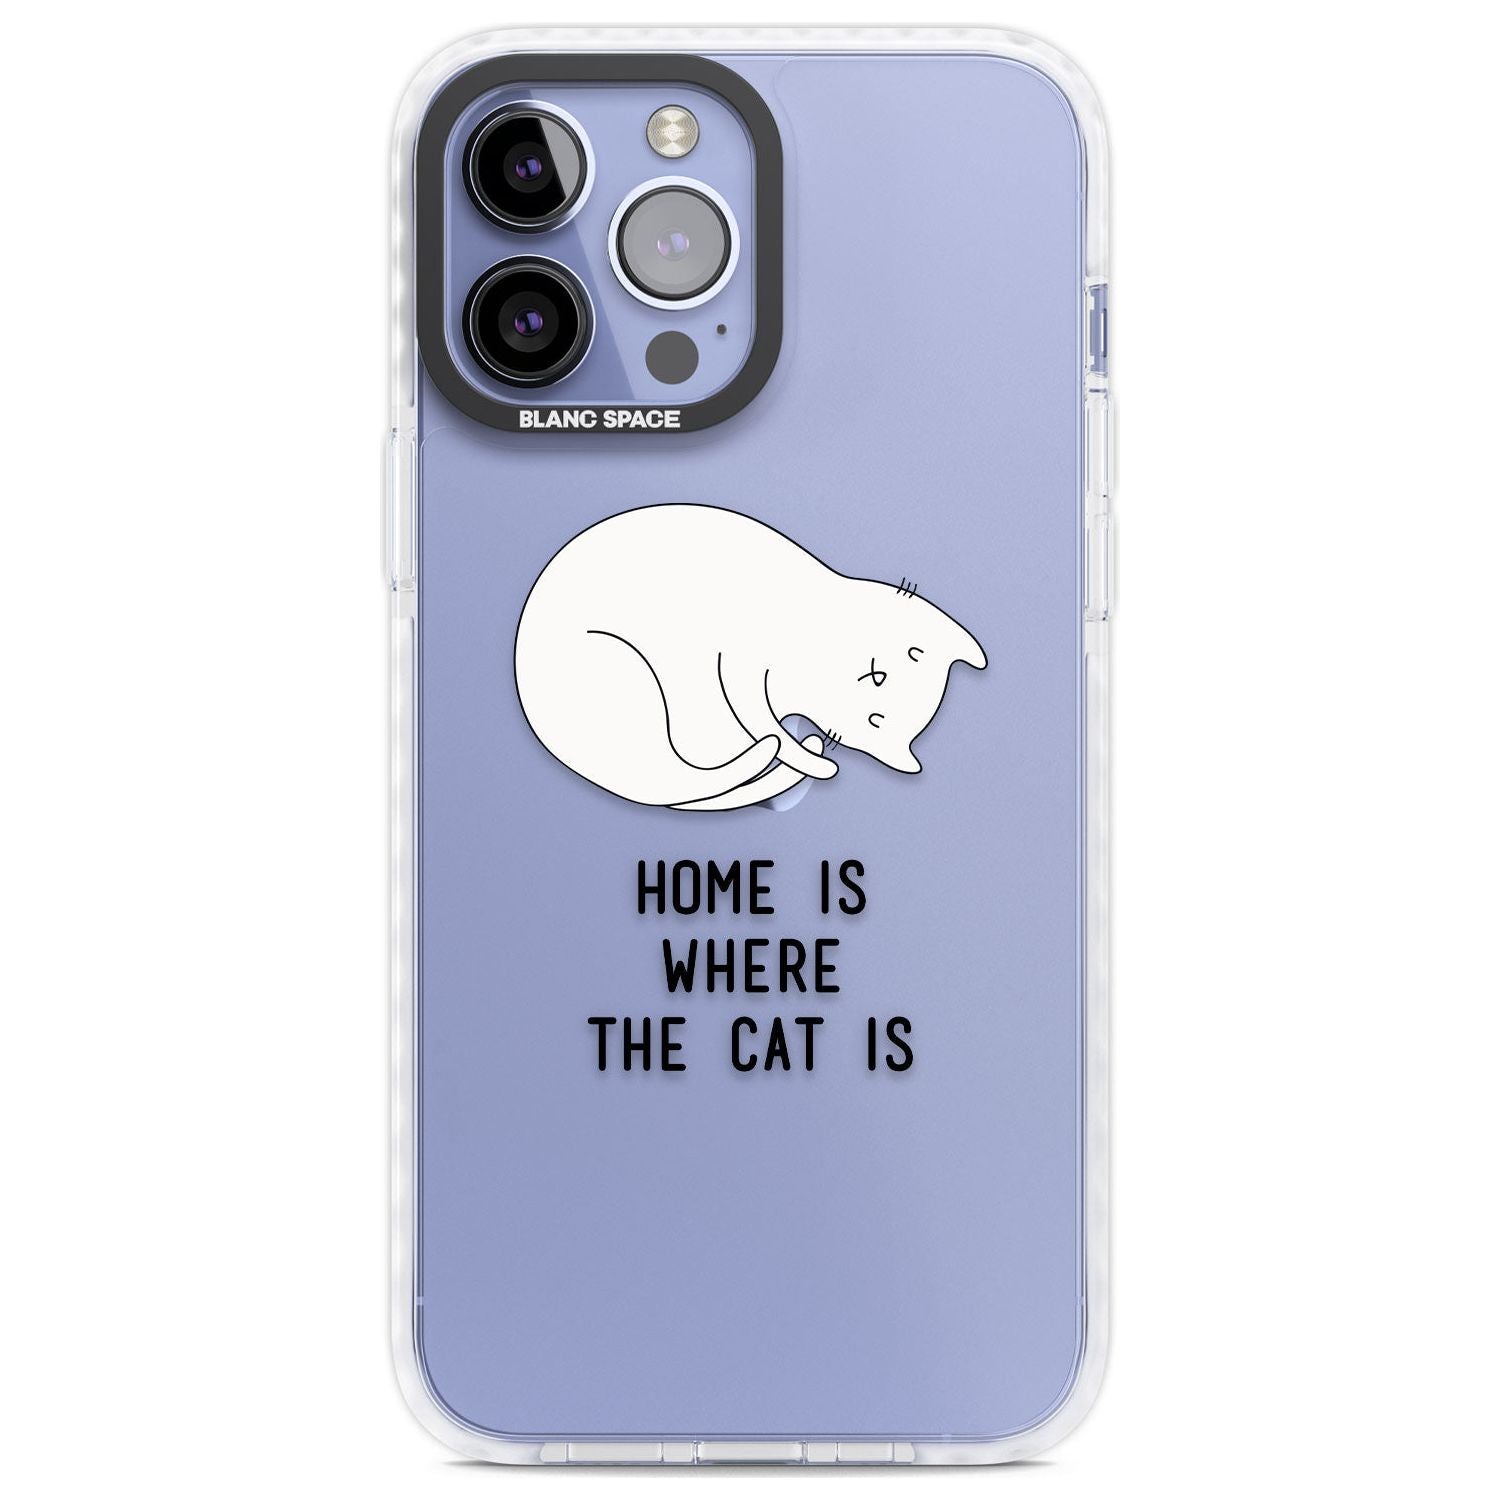 Home Is Where the Cat is Phone Case iPhone 13 Pro Max / Impact Case,iPhone 14 Pro Max / Impact Case Blanc Space